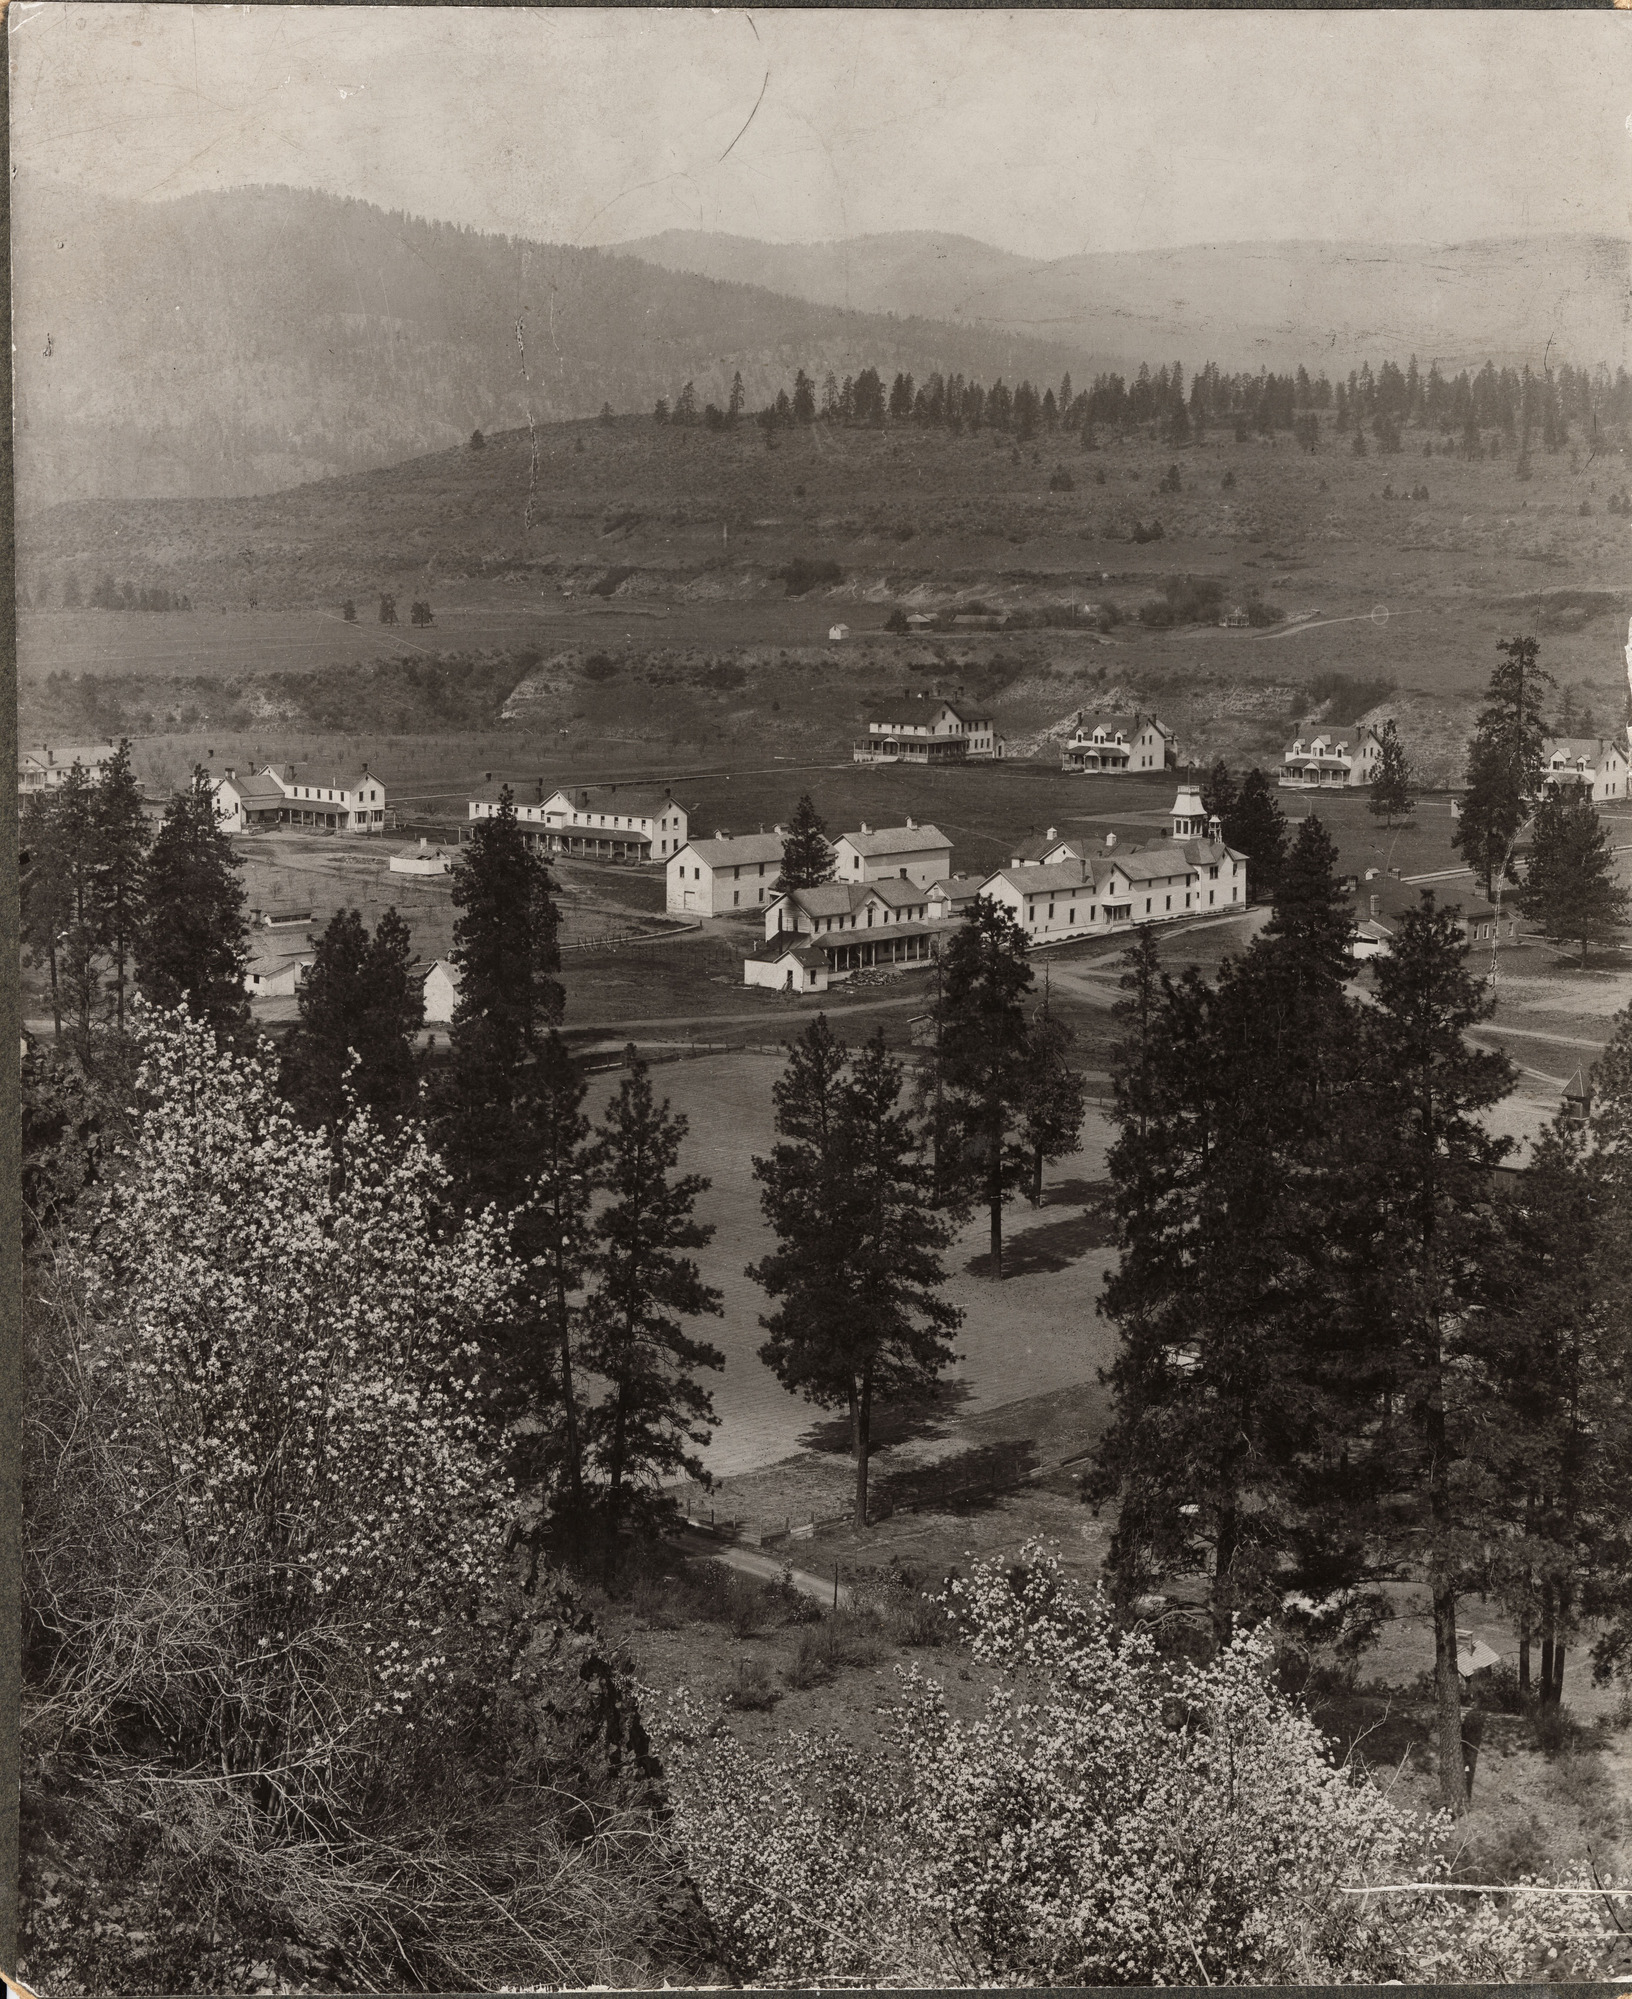 Black and white photograph of multiple multi-story white buildings in a cleared valley